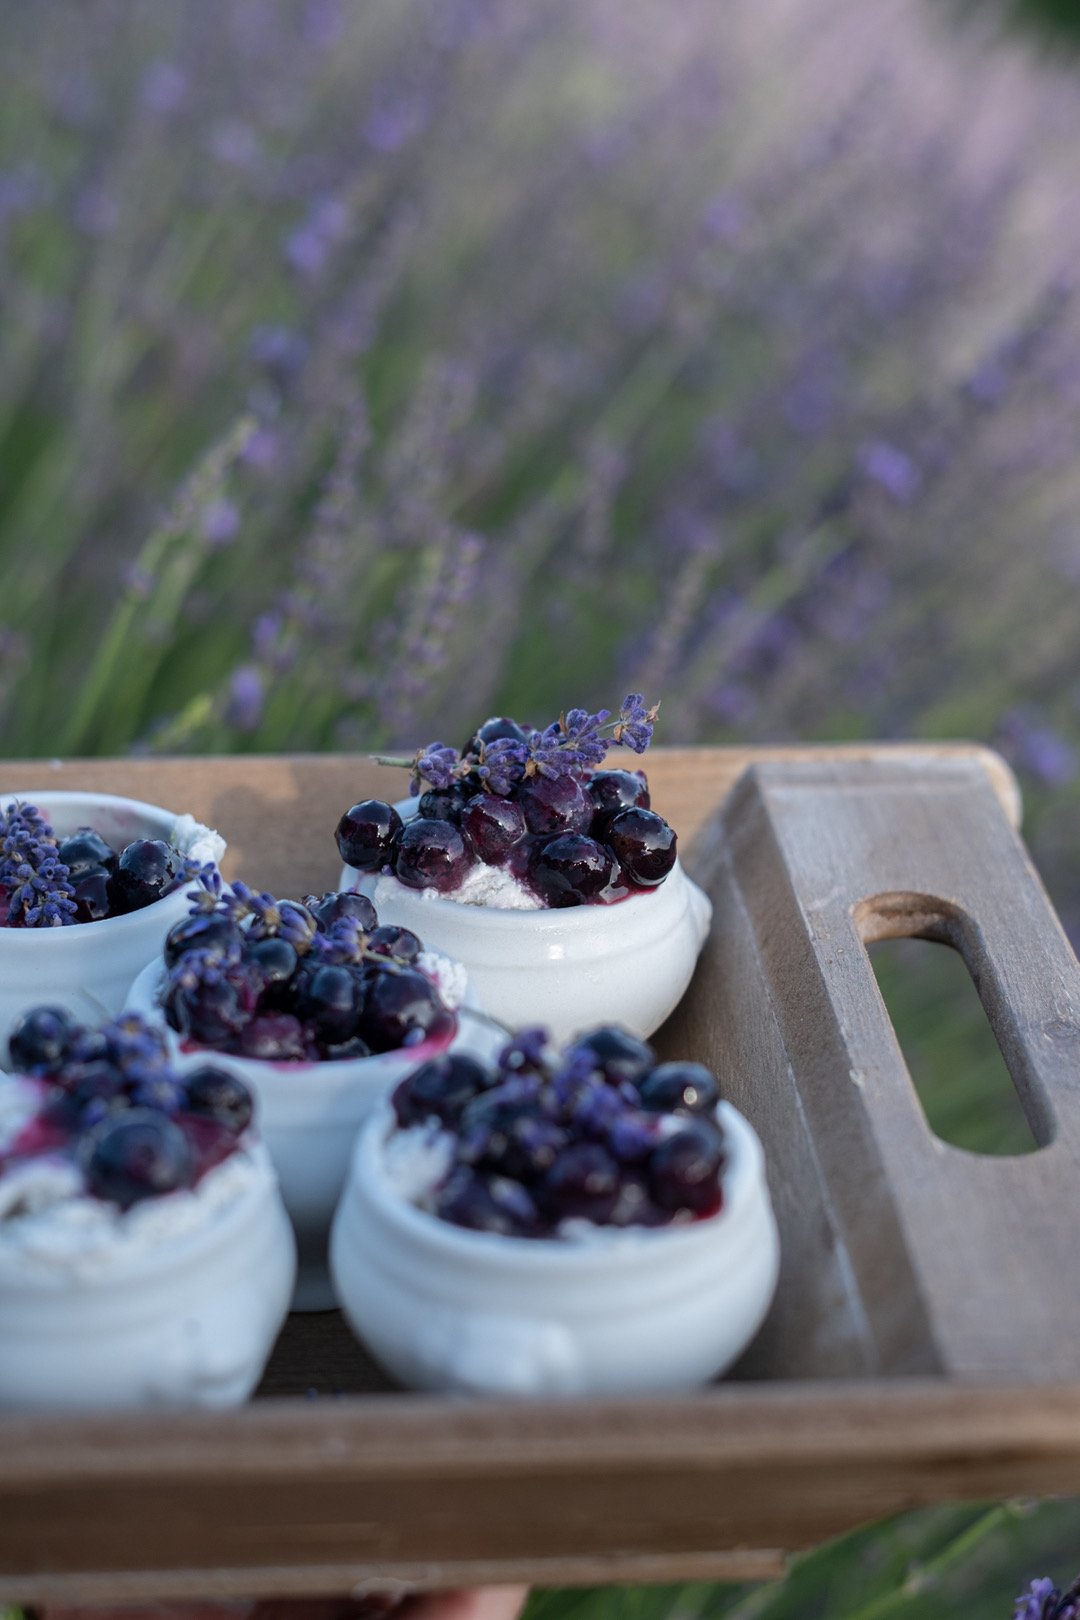 ICE CREAM WITH LAVENDER BLUEBERRY COMPOTE